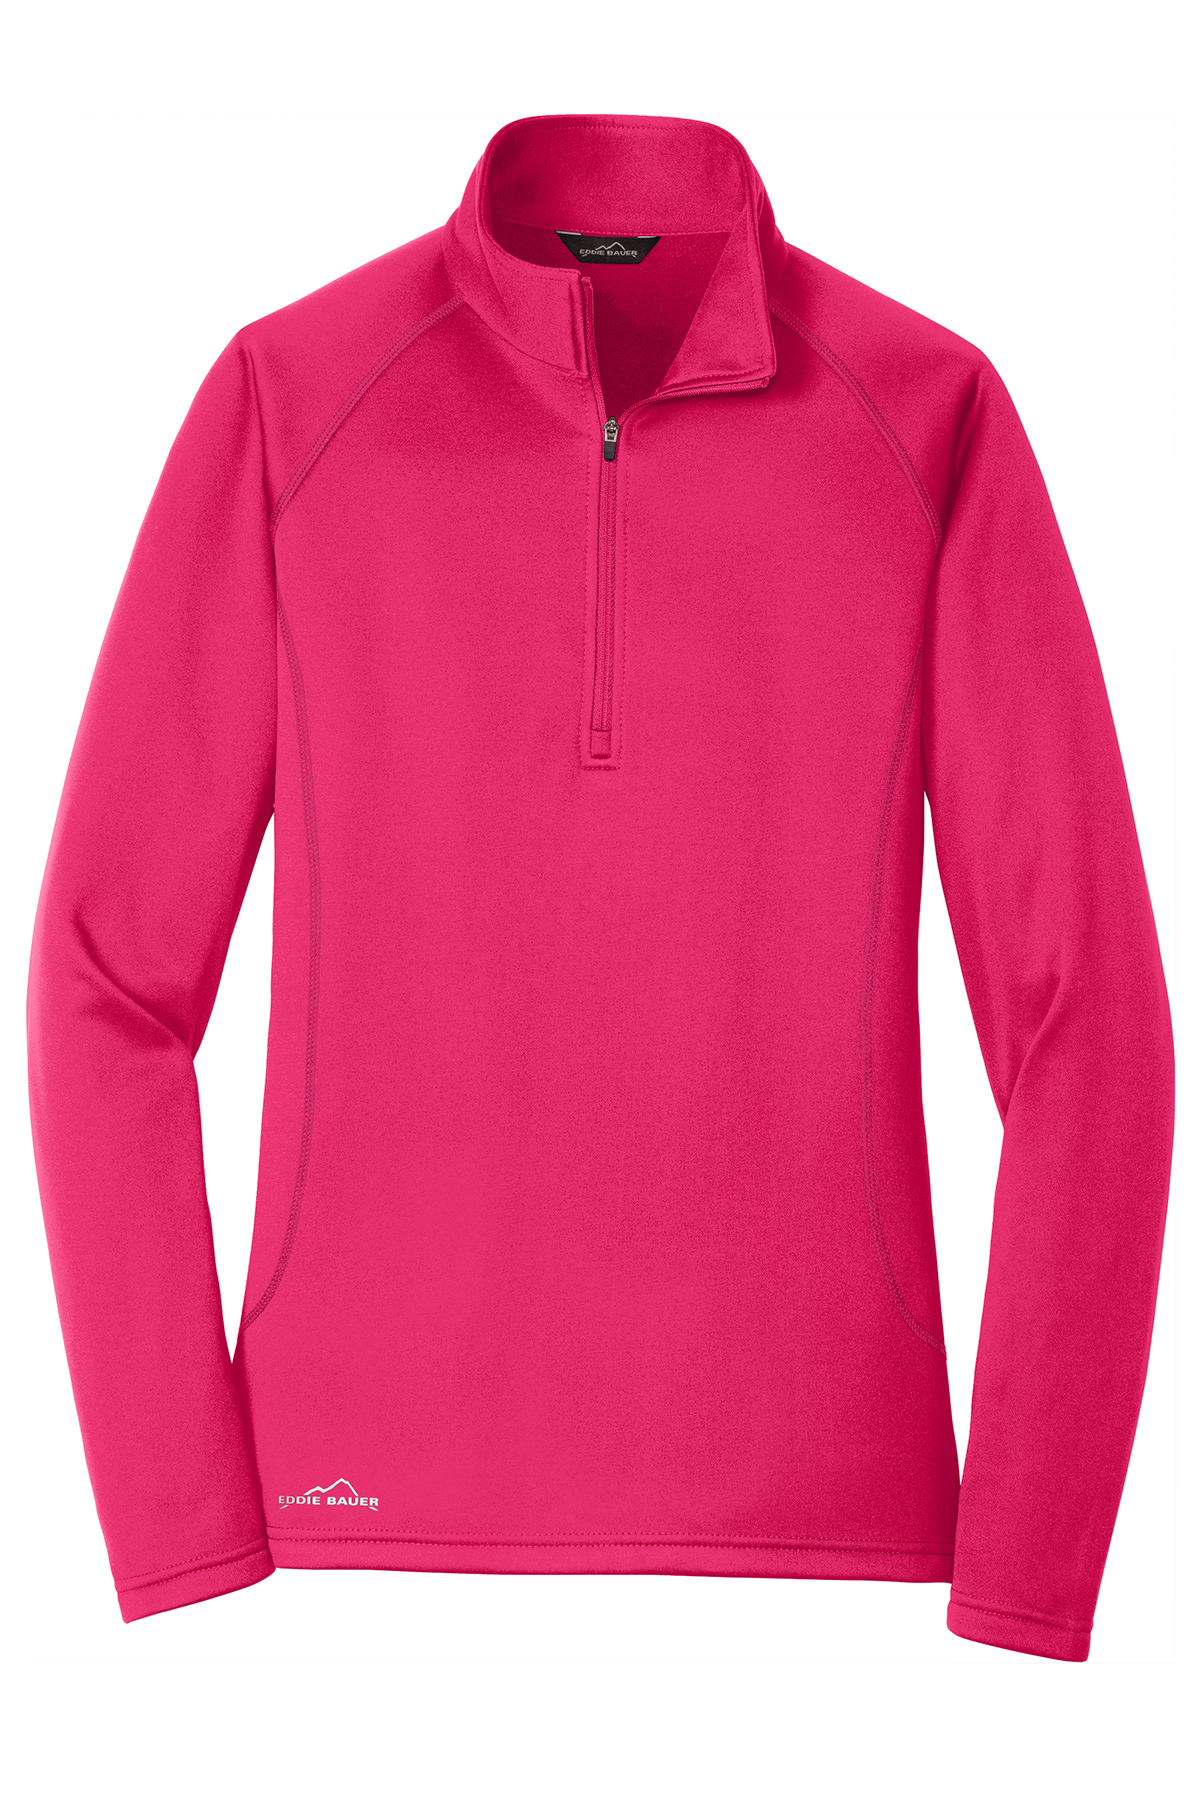 Eddie Bauer Fleece-lined Outdoor Jacket (Sunfaded Hot Pink) (women's),  Women's Fashion, Coats, Jackets and Outerwear on Carousell